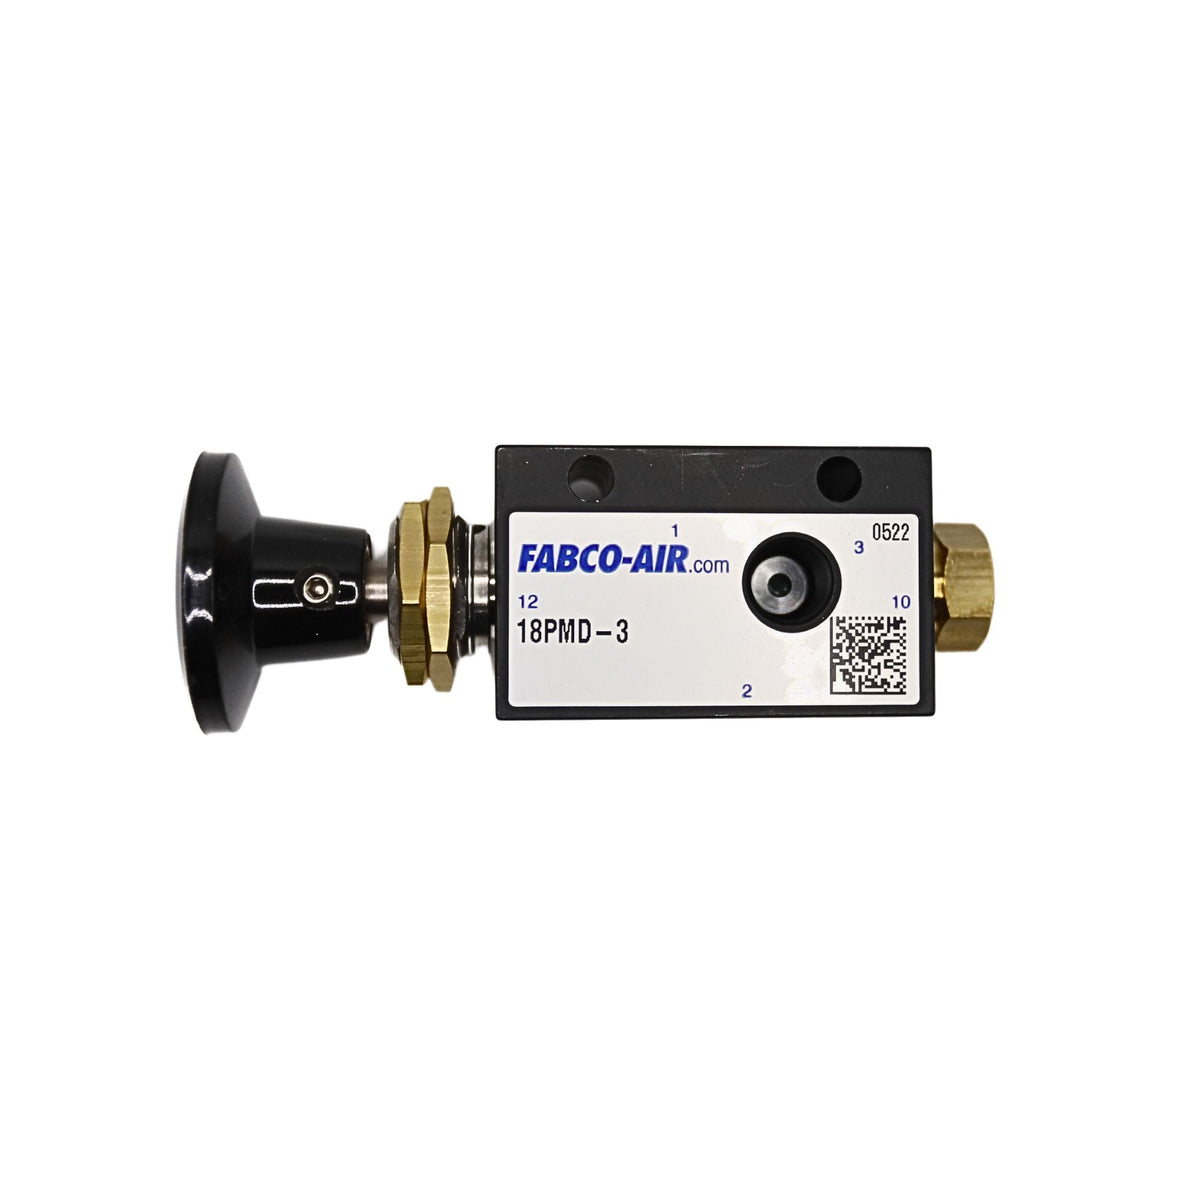 Fabco | Inline 3/2 Push Button, Detented, Panel Mount, 1/8 in NPTF | 18PMD-3 used on fabcoair product line